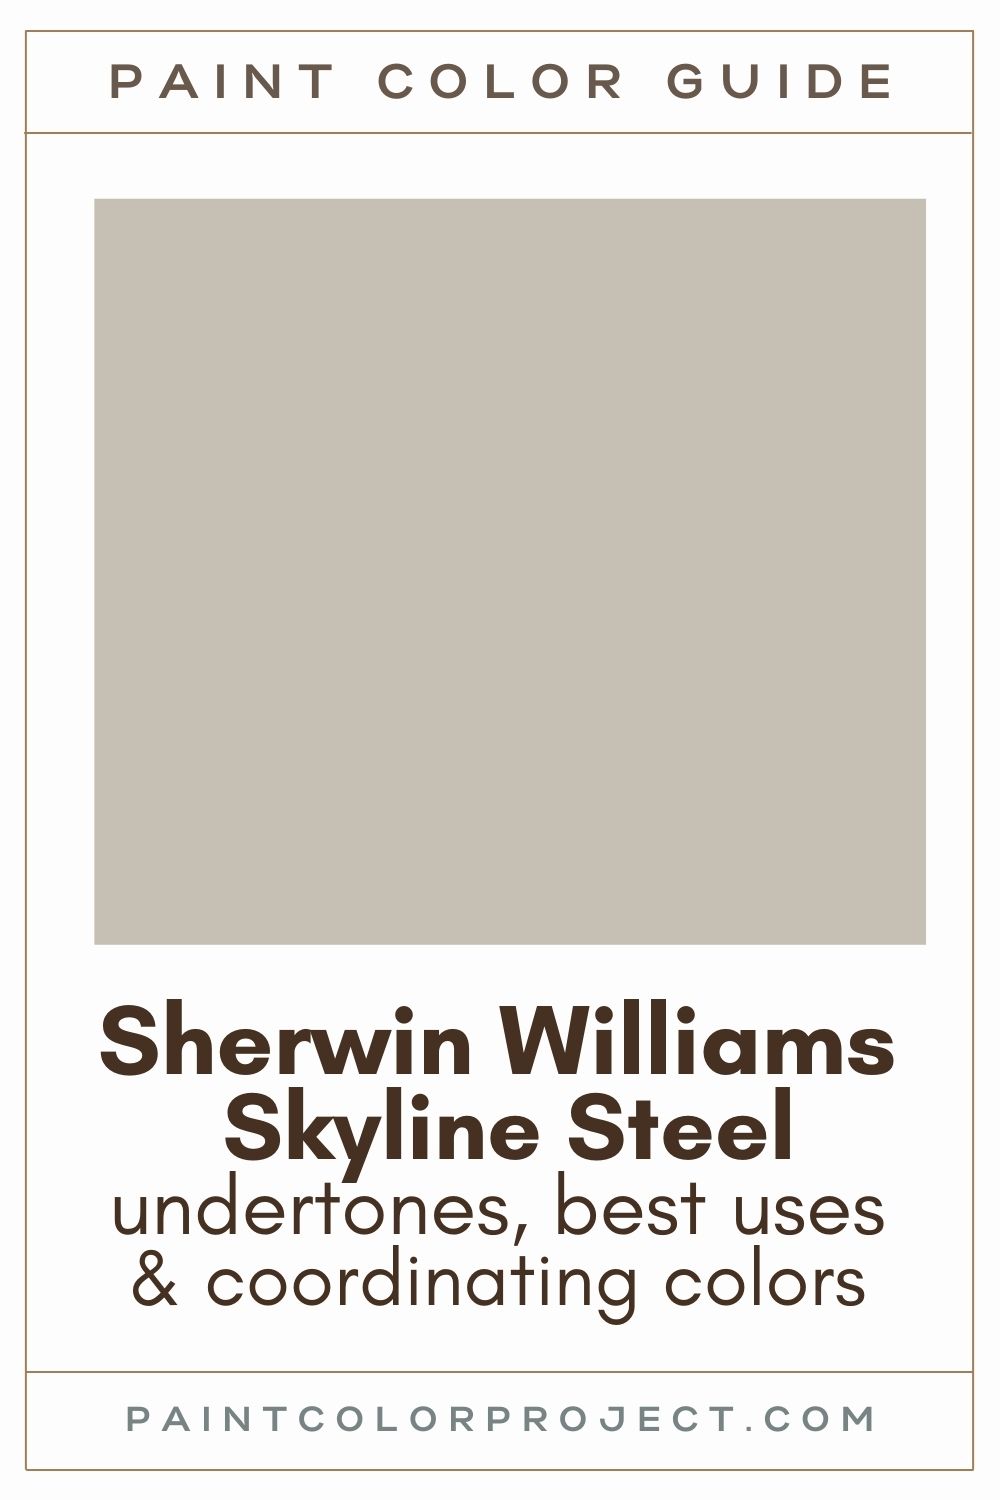 Sherwin Williams Skyline Steel paint color guide